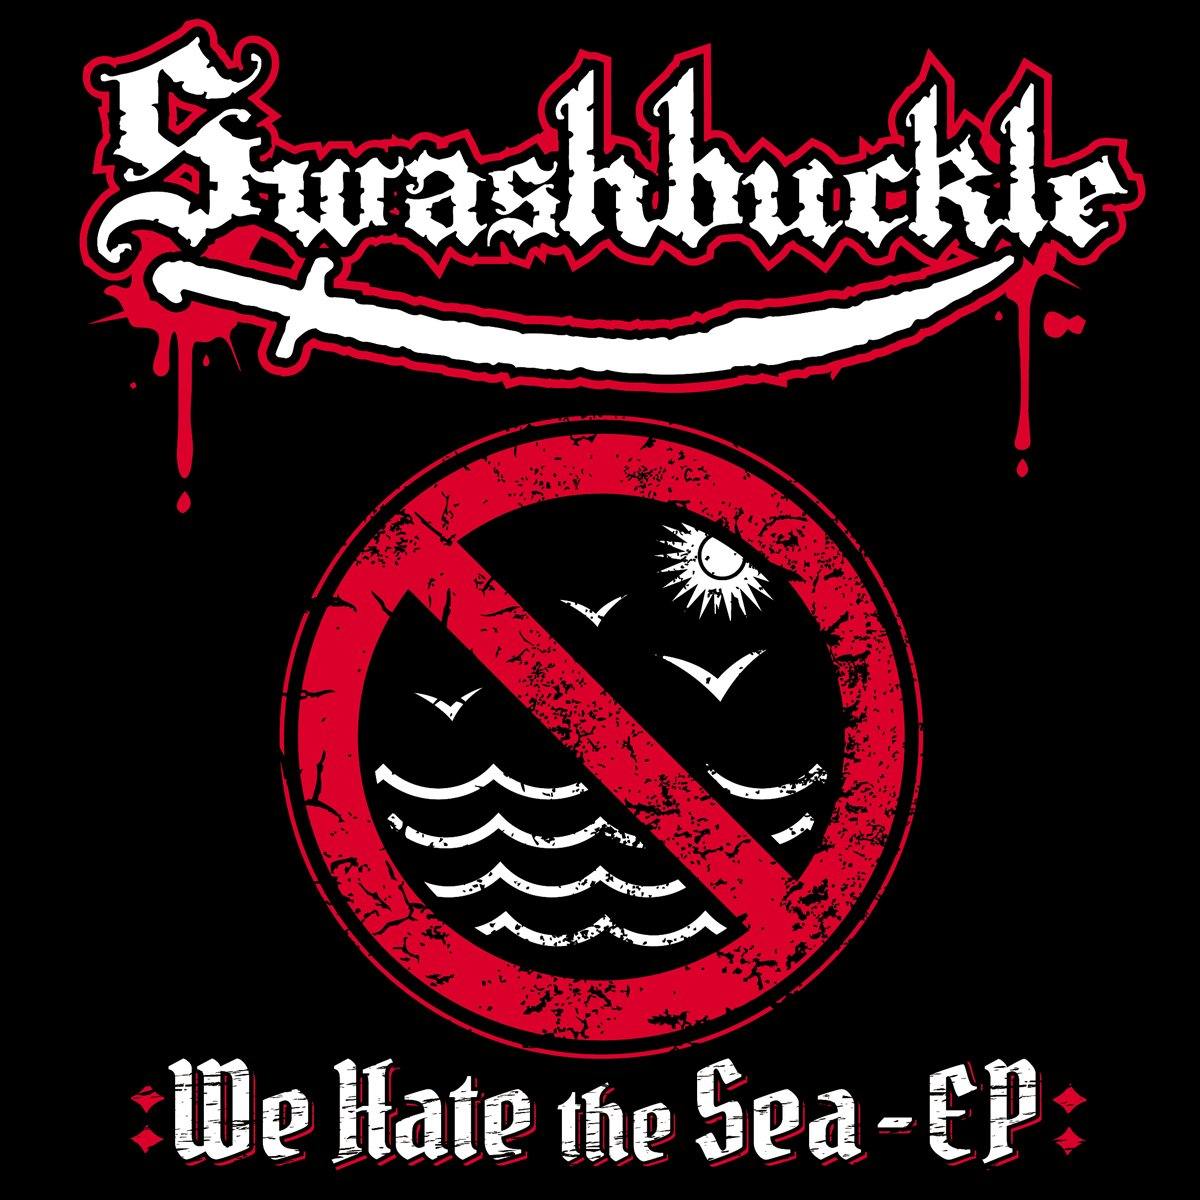 Buy – Swashbuckle "We Hate The Sea" Digital Download – Band & Music Merch – Cold Cuts Merch